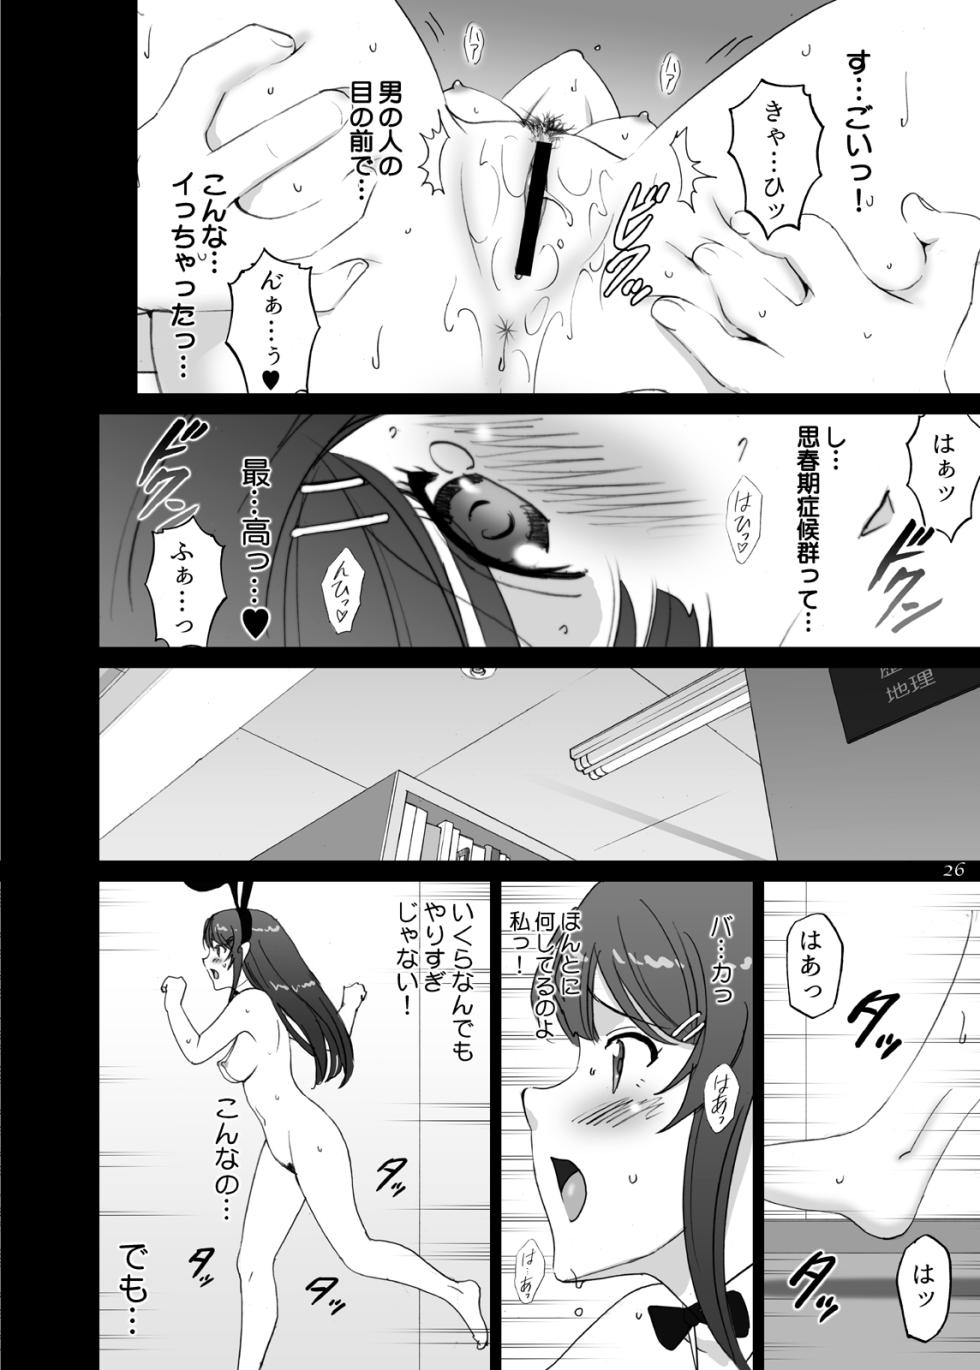 [ACTIVA (SMAC)] Youth Bunny Senpai Doesn't Dream of Wandering Naked - Page 26